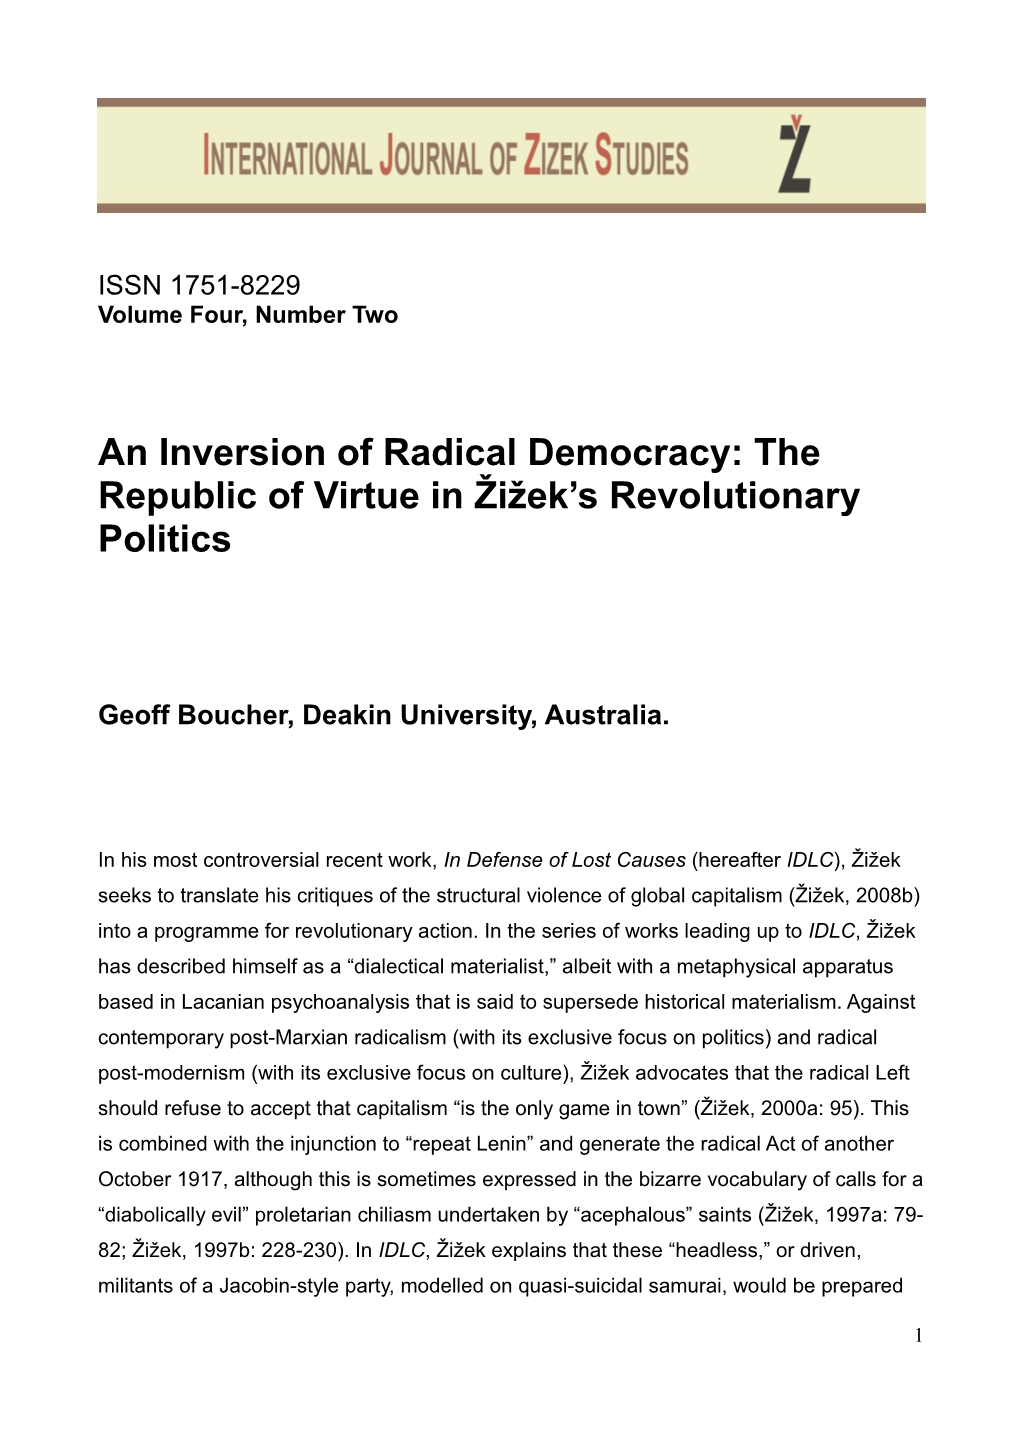 An Inversion of Radical Democracy: the Republic of Virtue in Žižek's